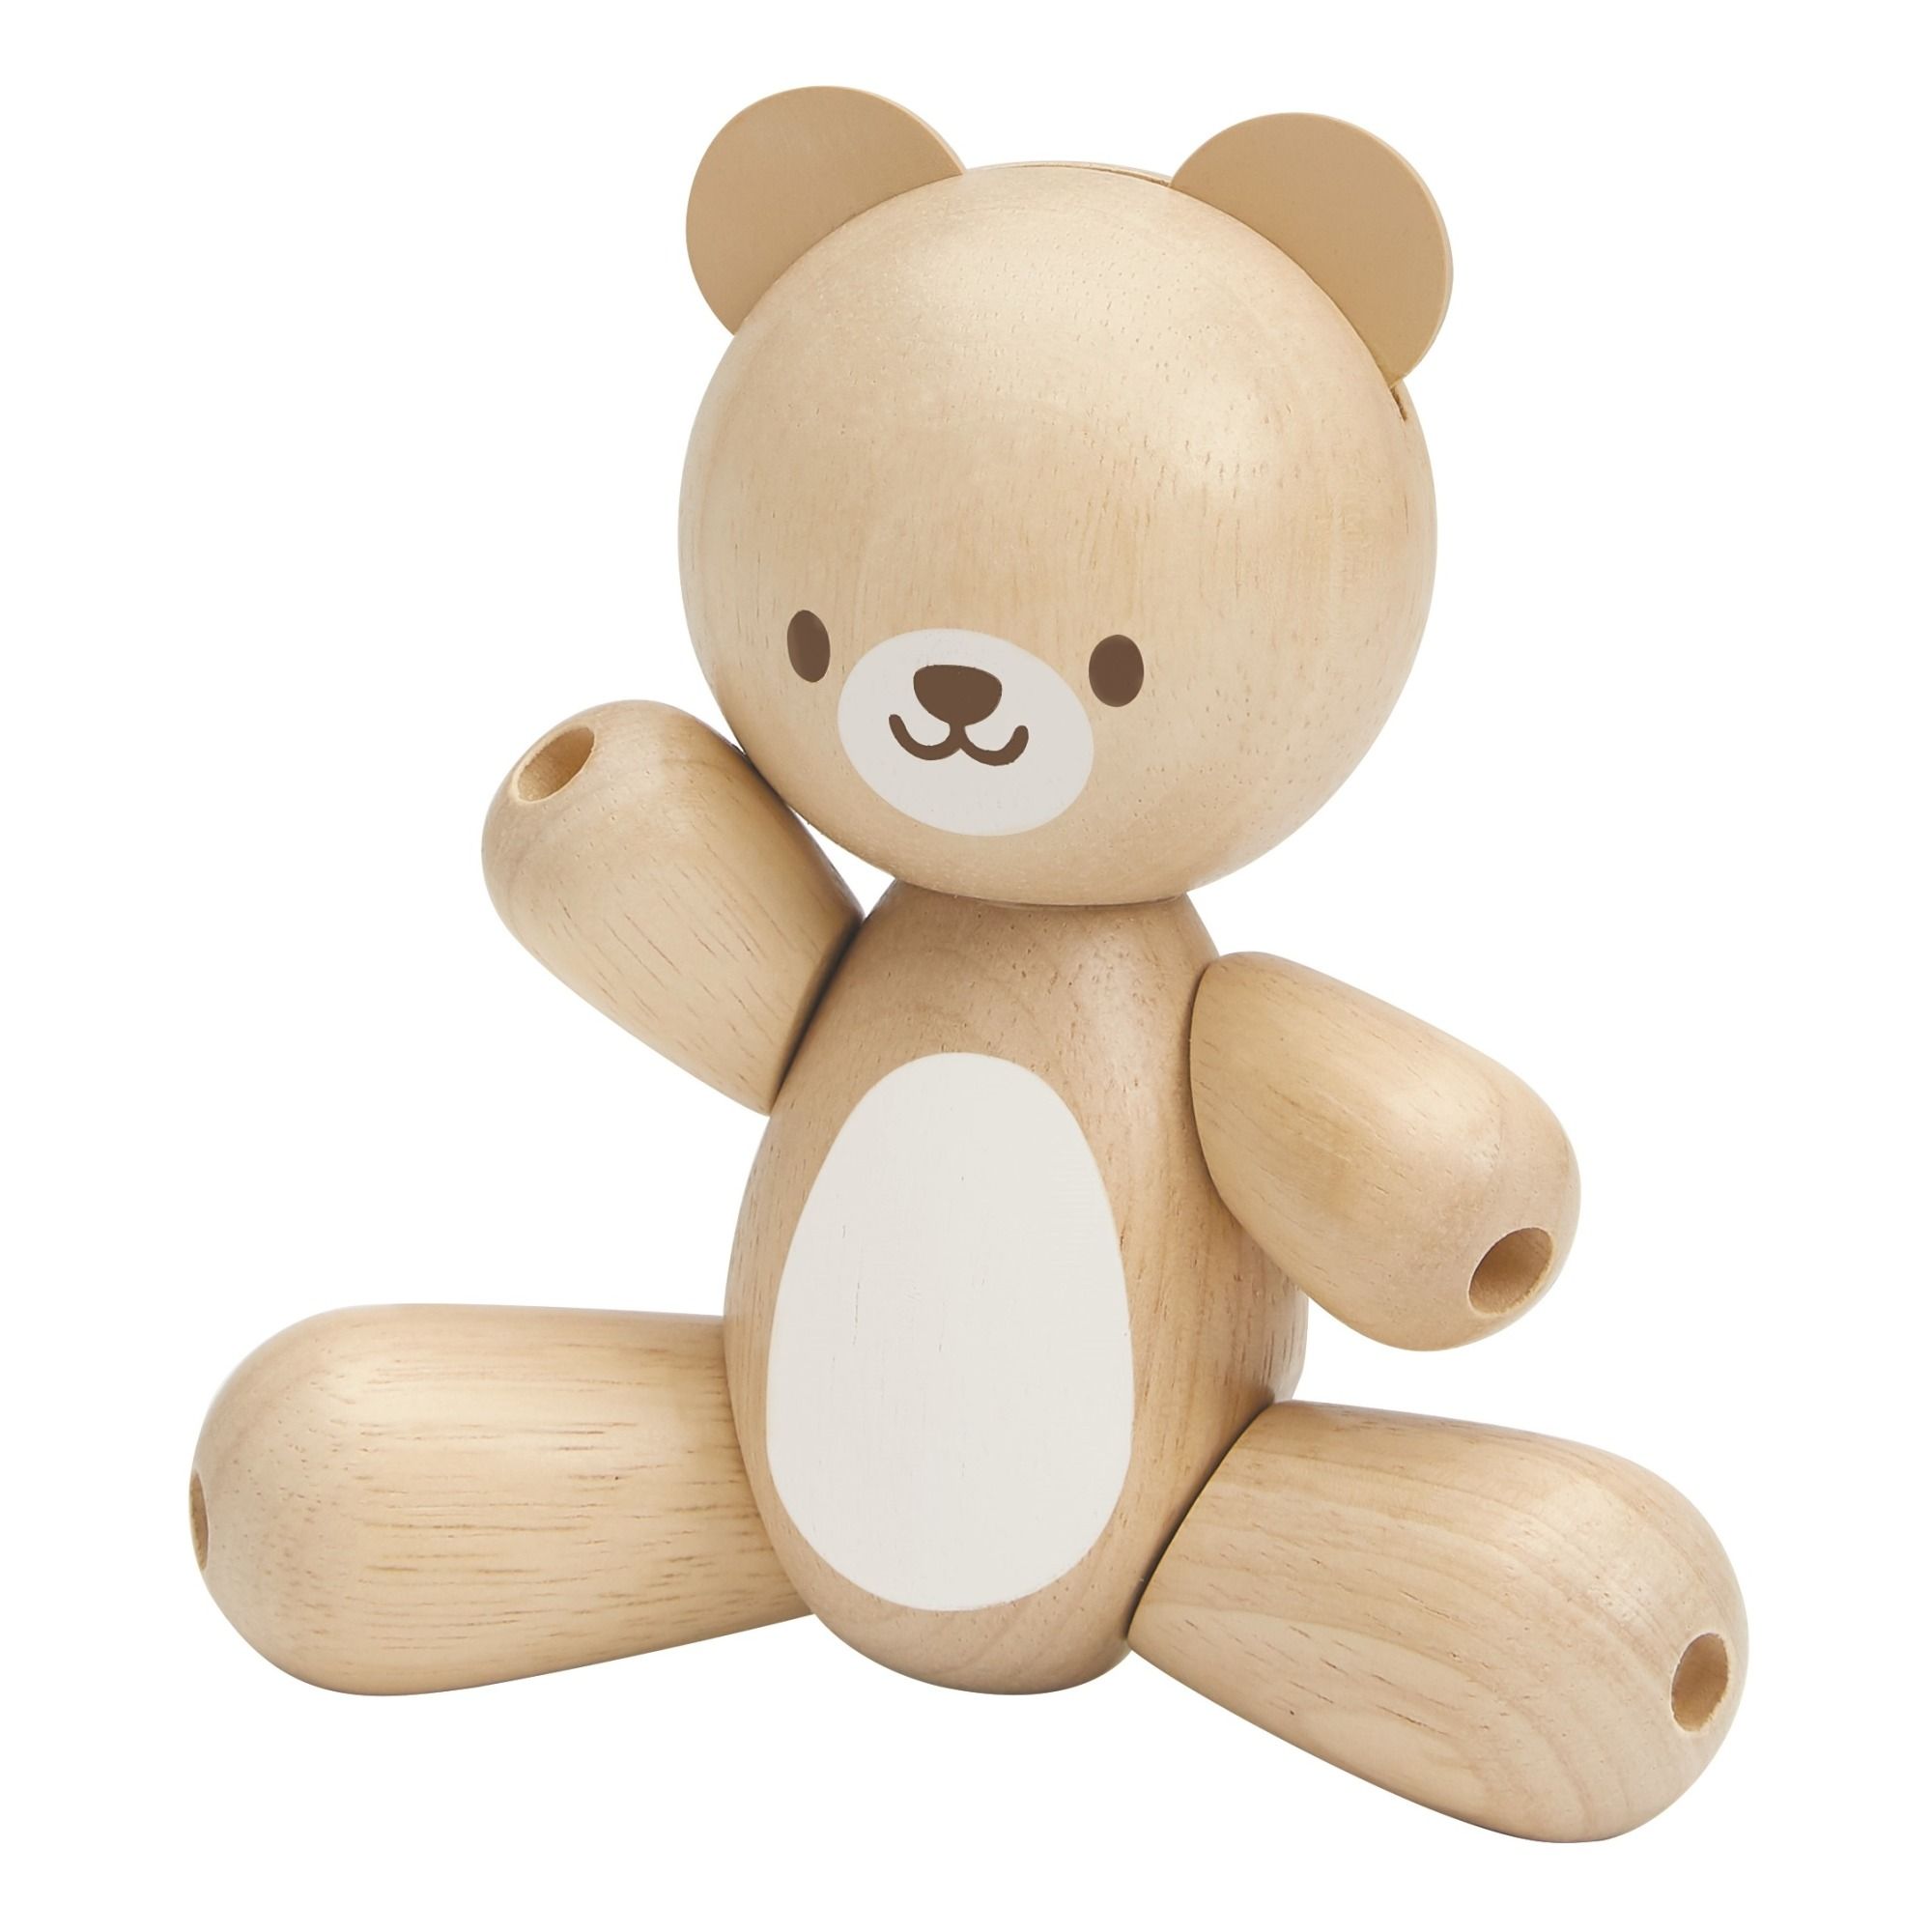 Wooden jointed teddy bear Plan Toys Toys and Hobbies Baby